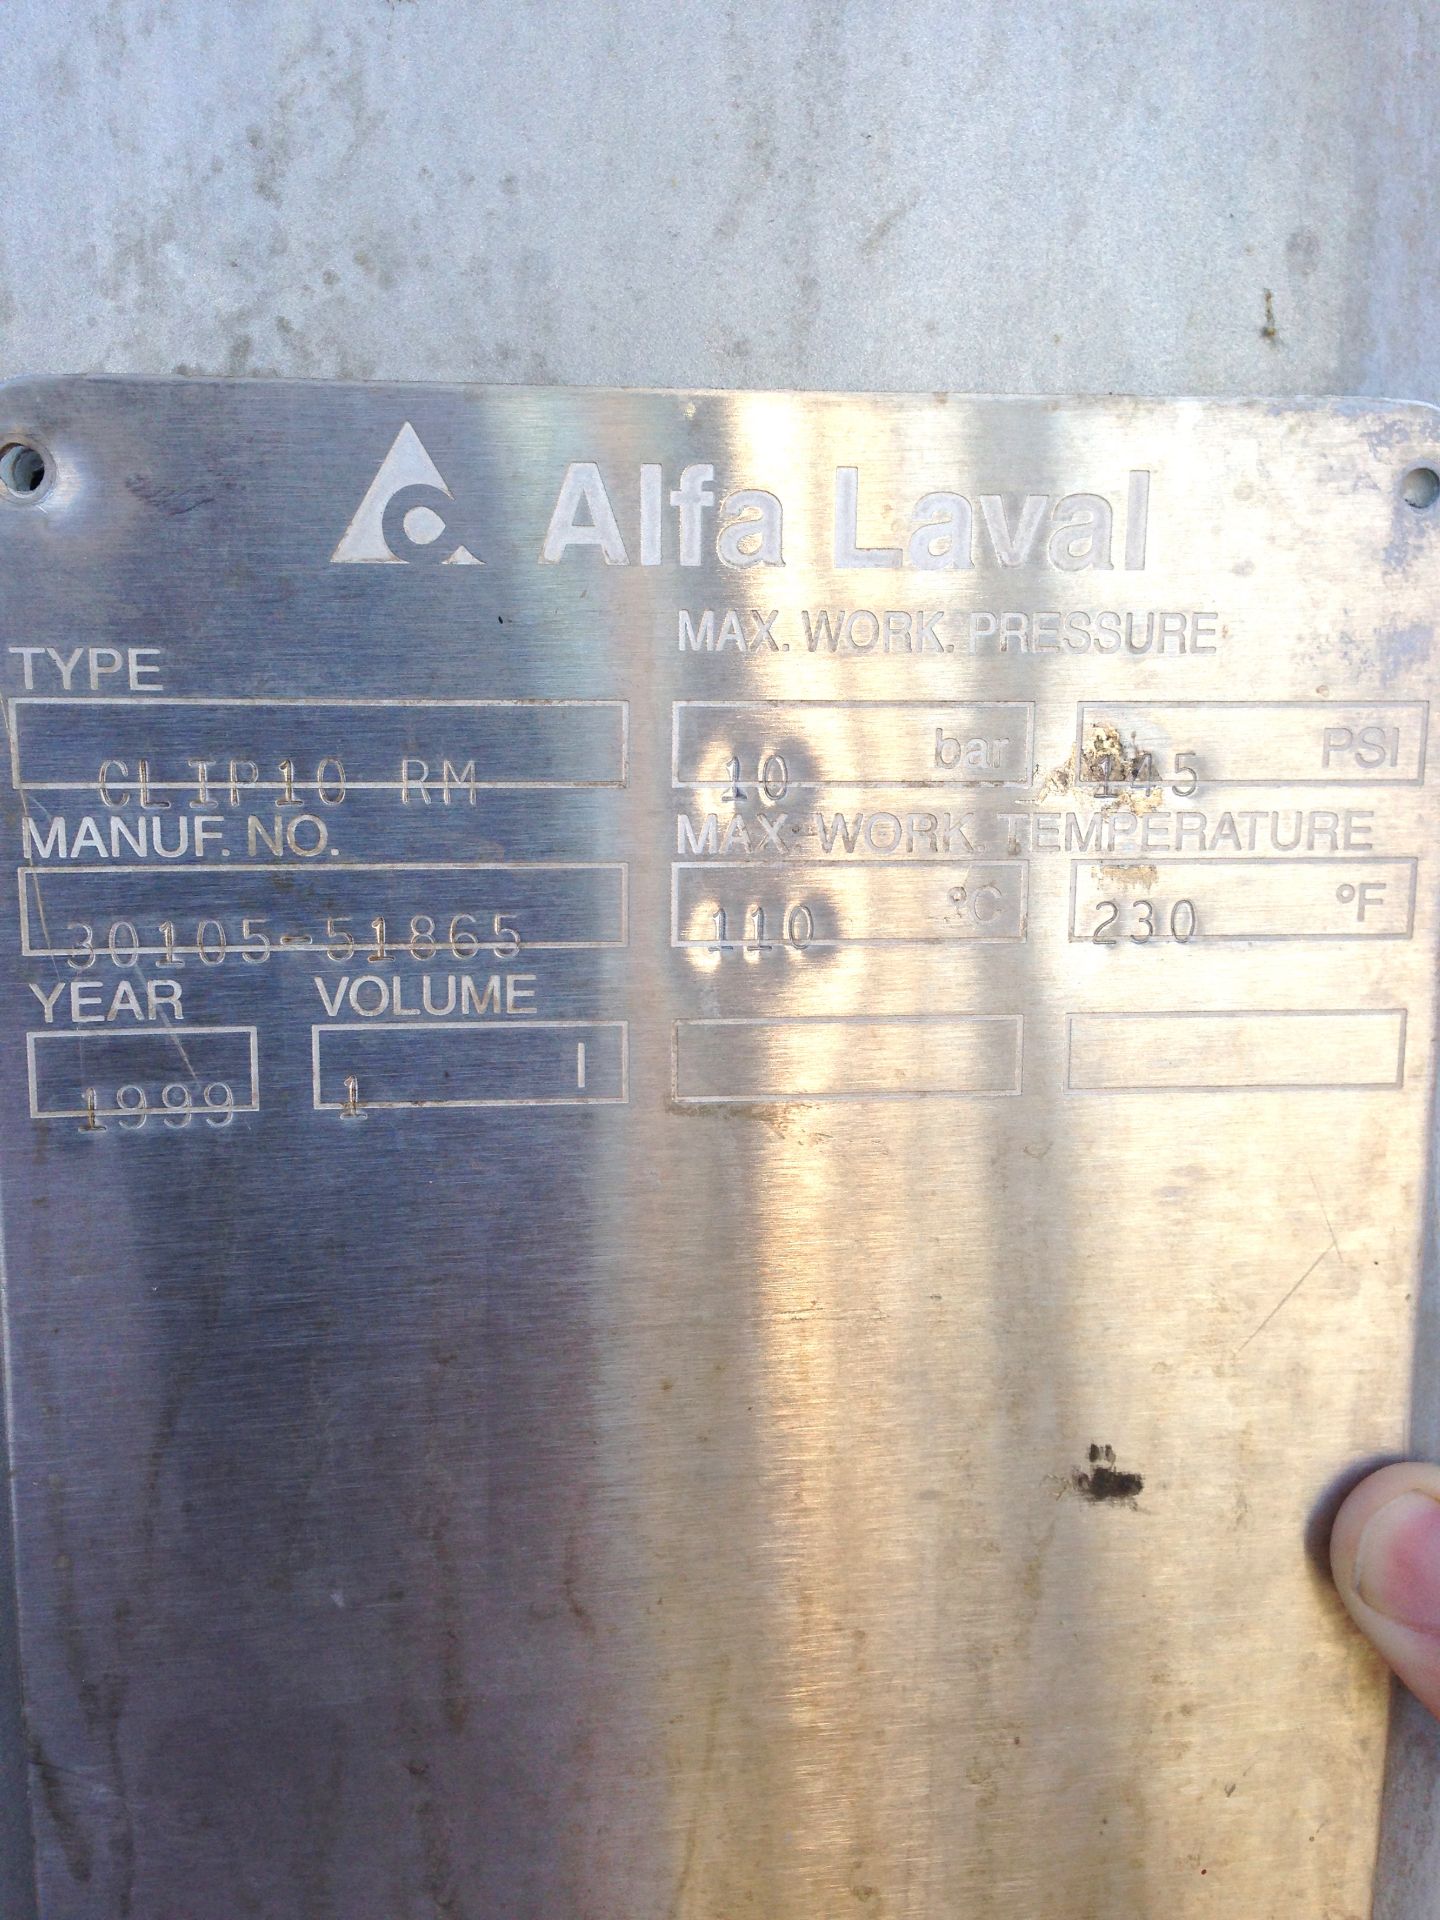 Alfa Laval Clip 10 Plate Heat Exchanger Model: Clip 10 RM Serial: 30105-51865 Year: 1999 Stainless - Image 2 of 5